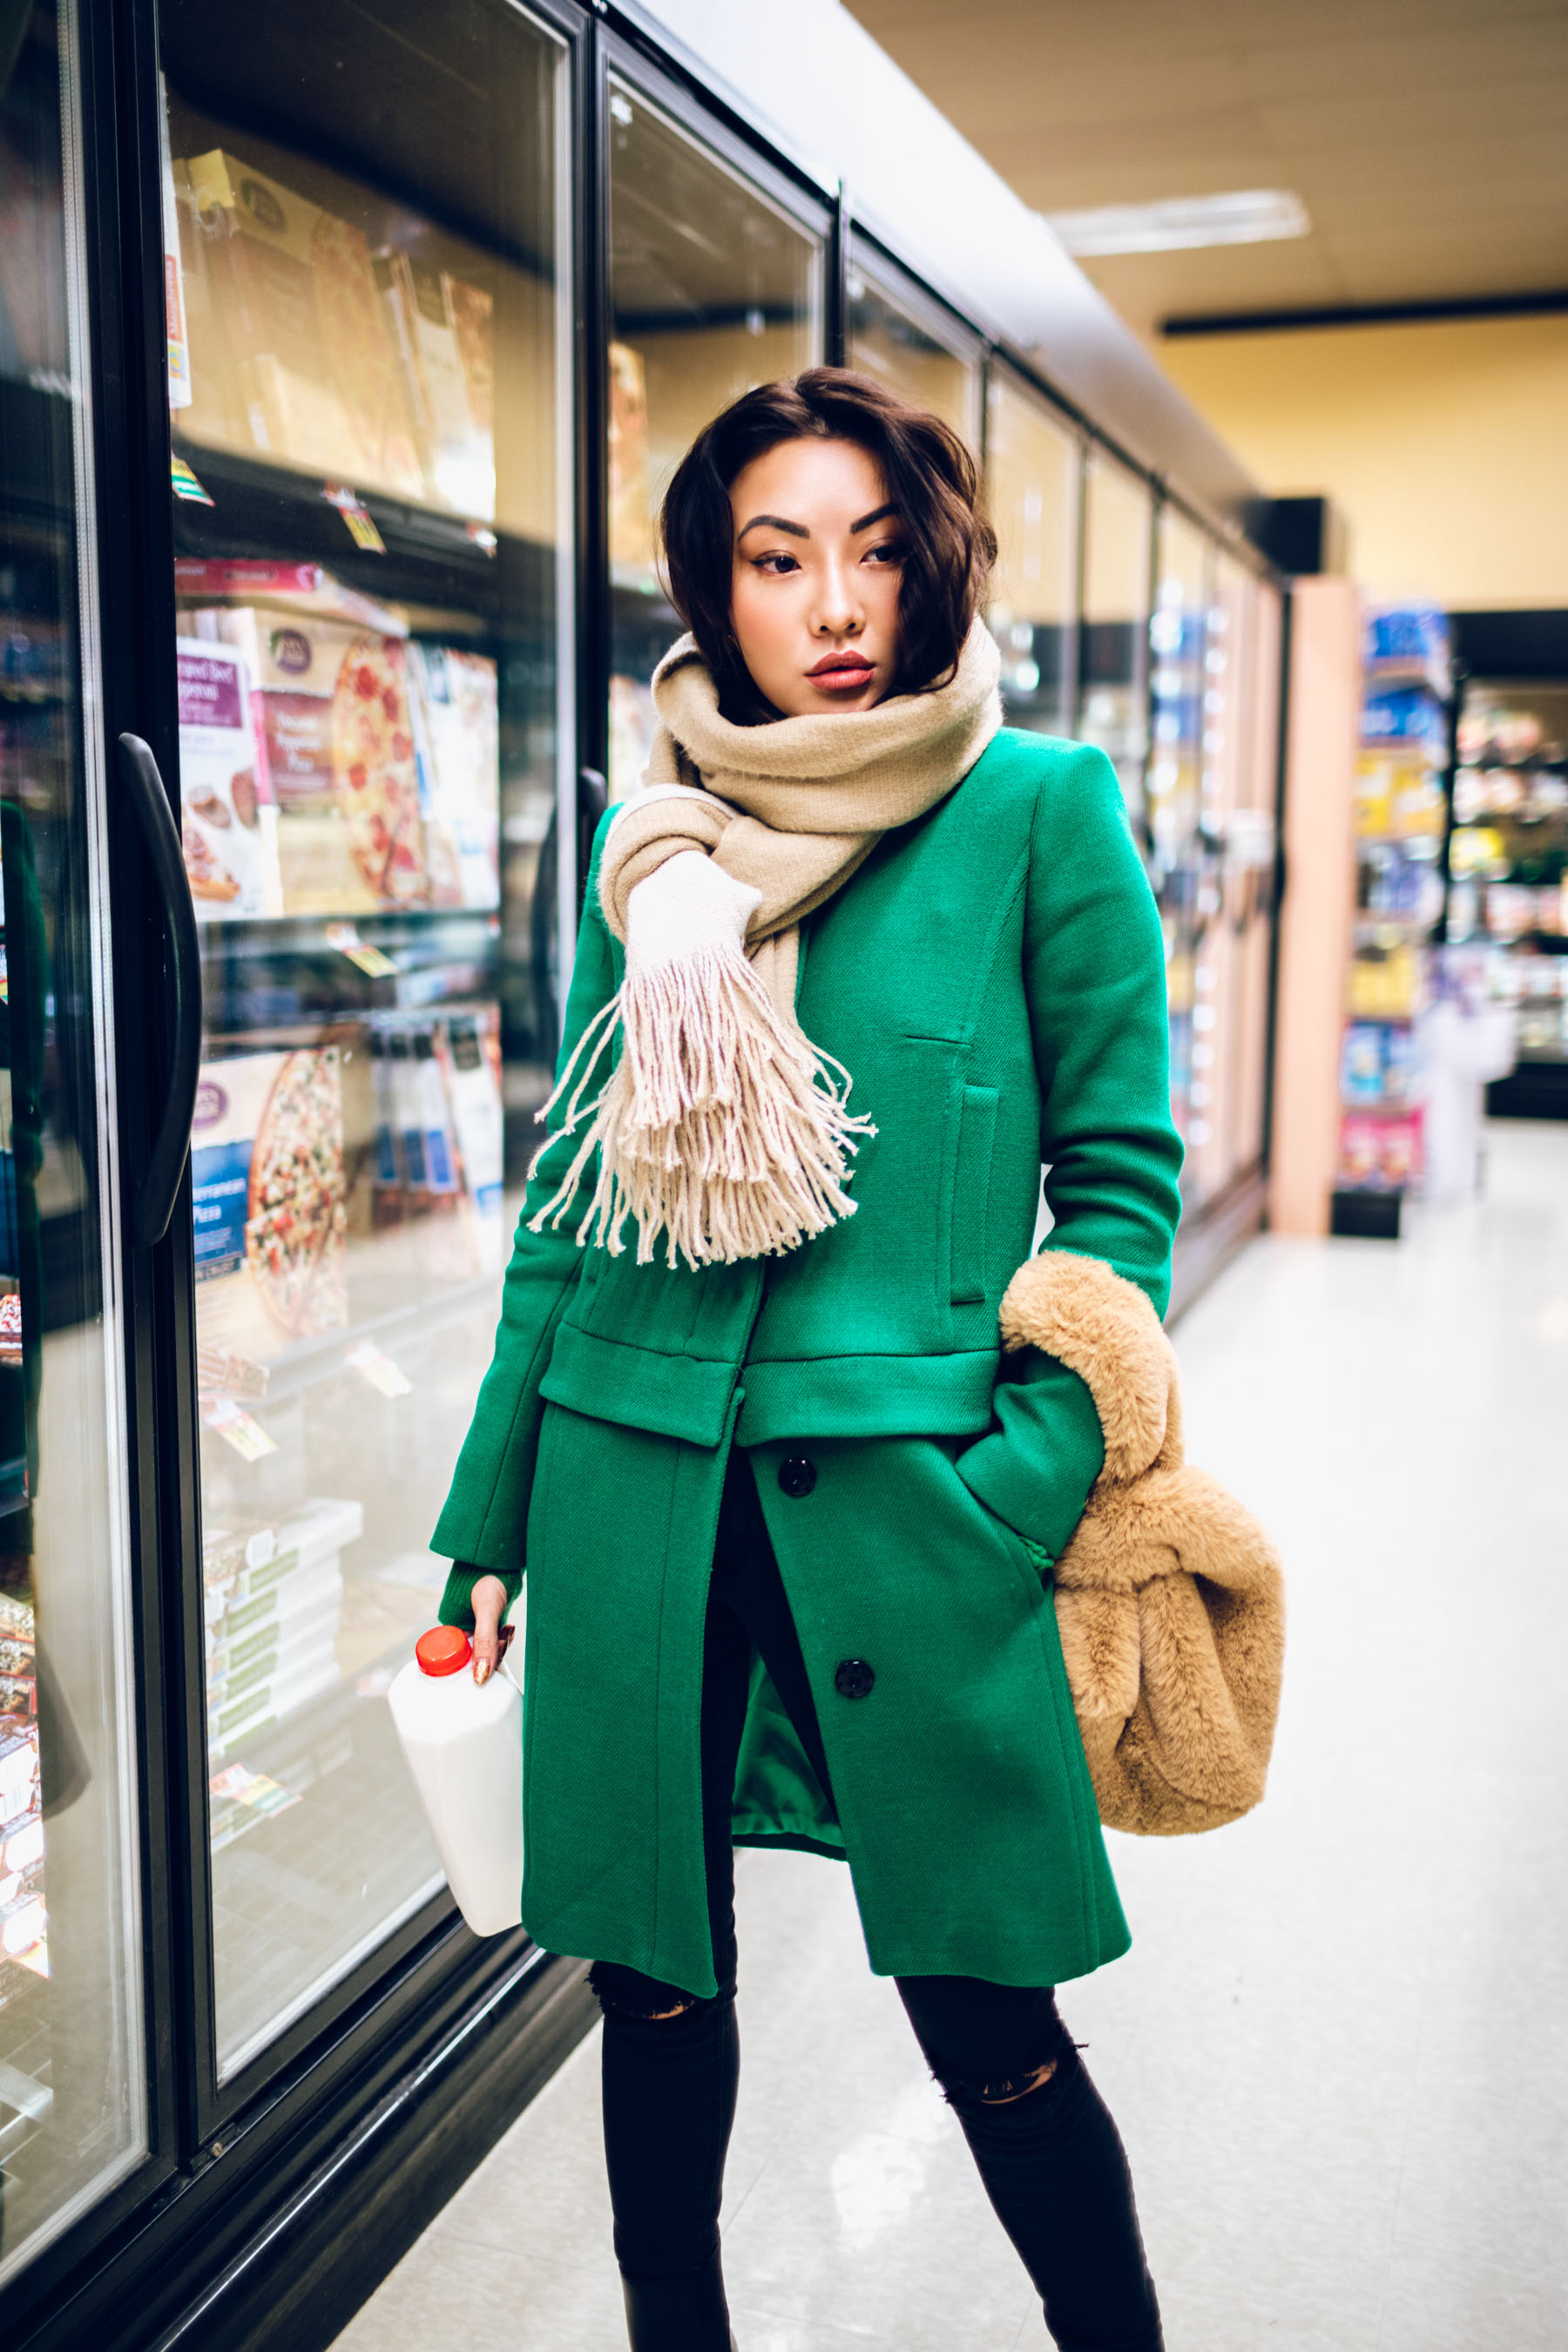 Instagram Outfits Round Up // Notjessfashion.com // Cozy Layered looks, jessica wang, fashion blogger, new york fashion blogger, street style fashion, ootd, asian blogger, green coat, statement coat, wrapped scarf, cozy winter looks, fur handbag, lifestyle portrait